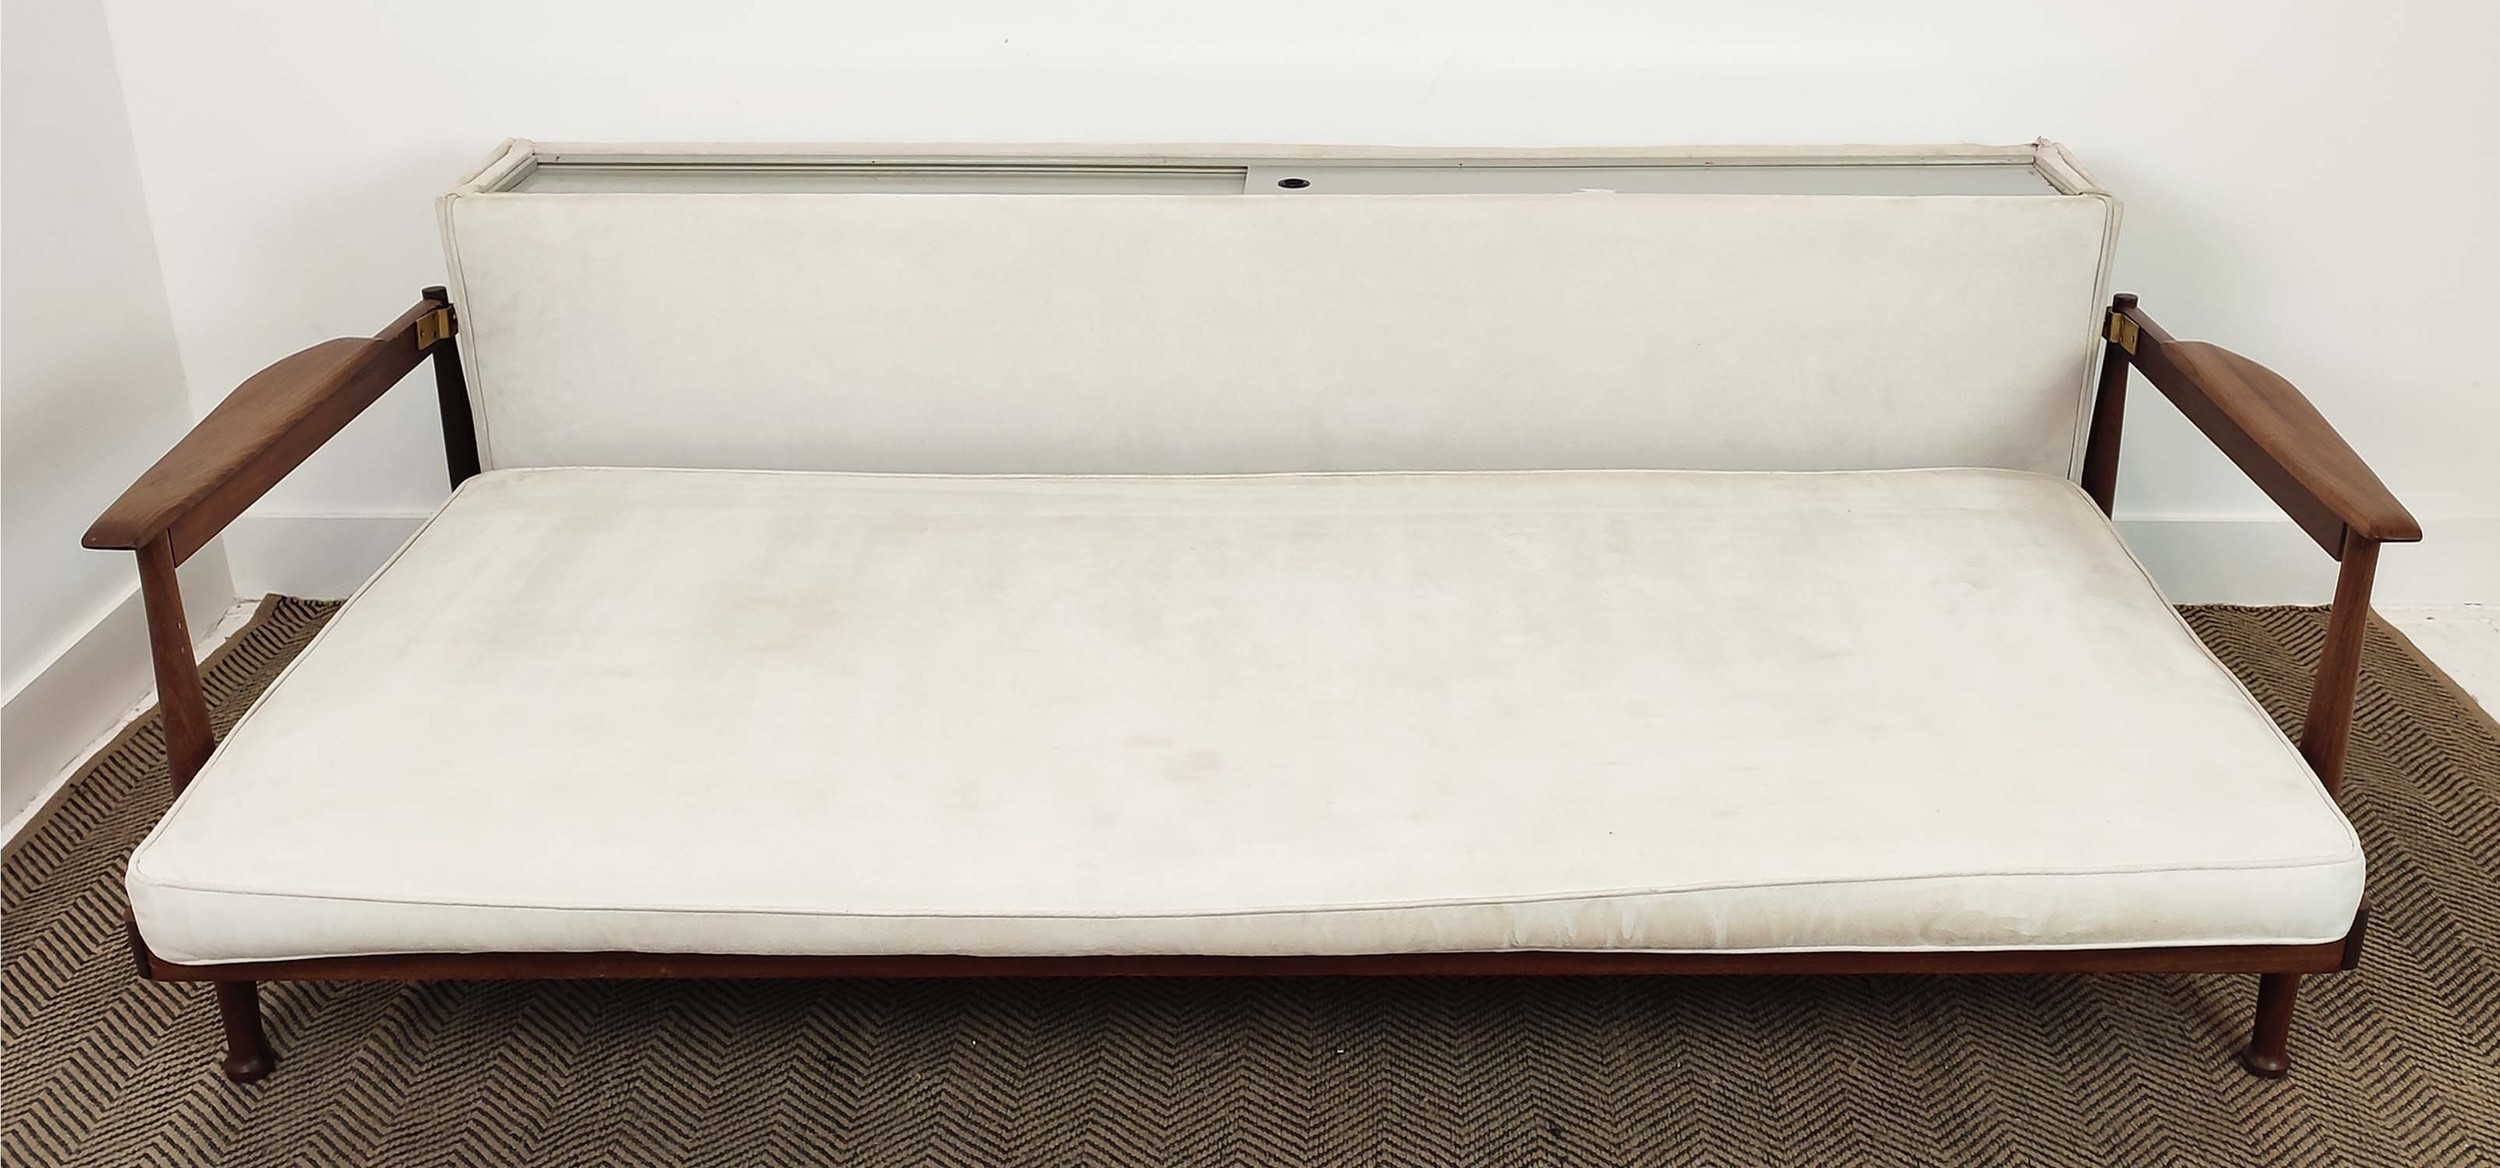 SOFA, vintage 20th century with a tilting back exposing hidden storage, 205cm W x 81cm D. - Image 7 of 9